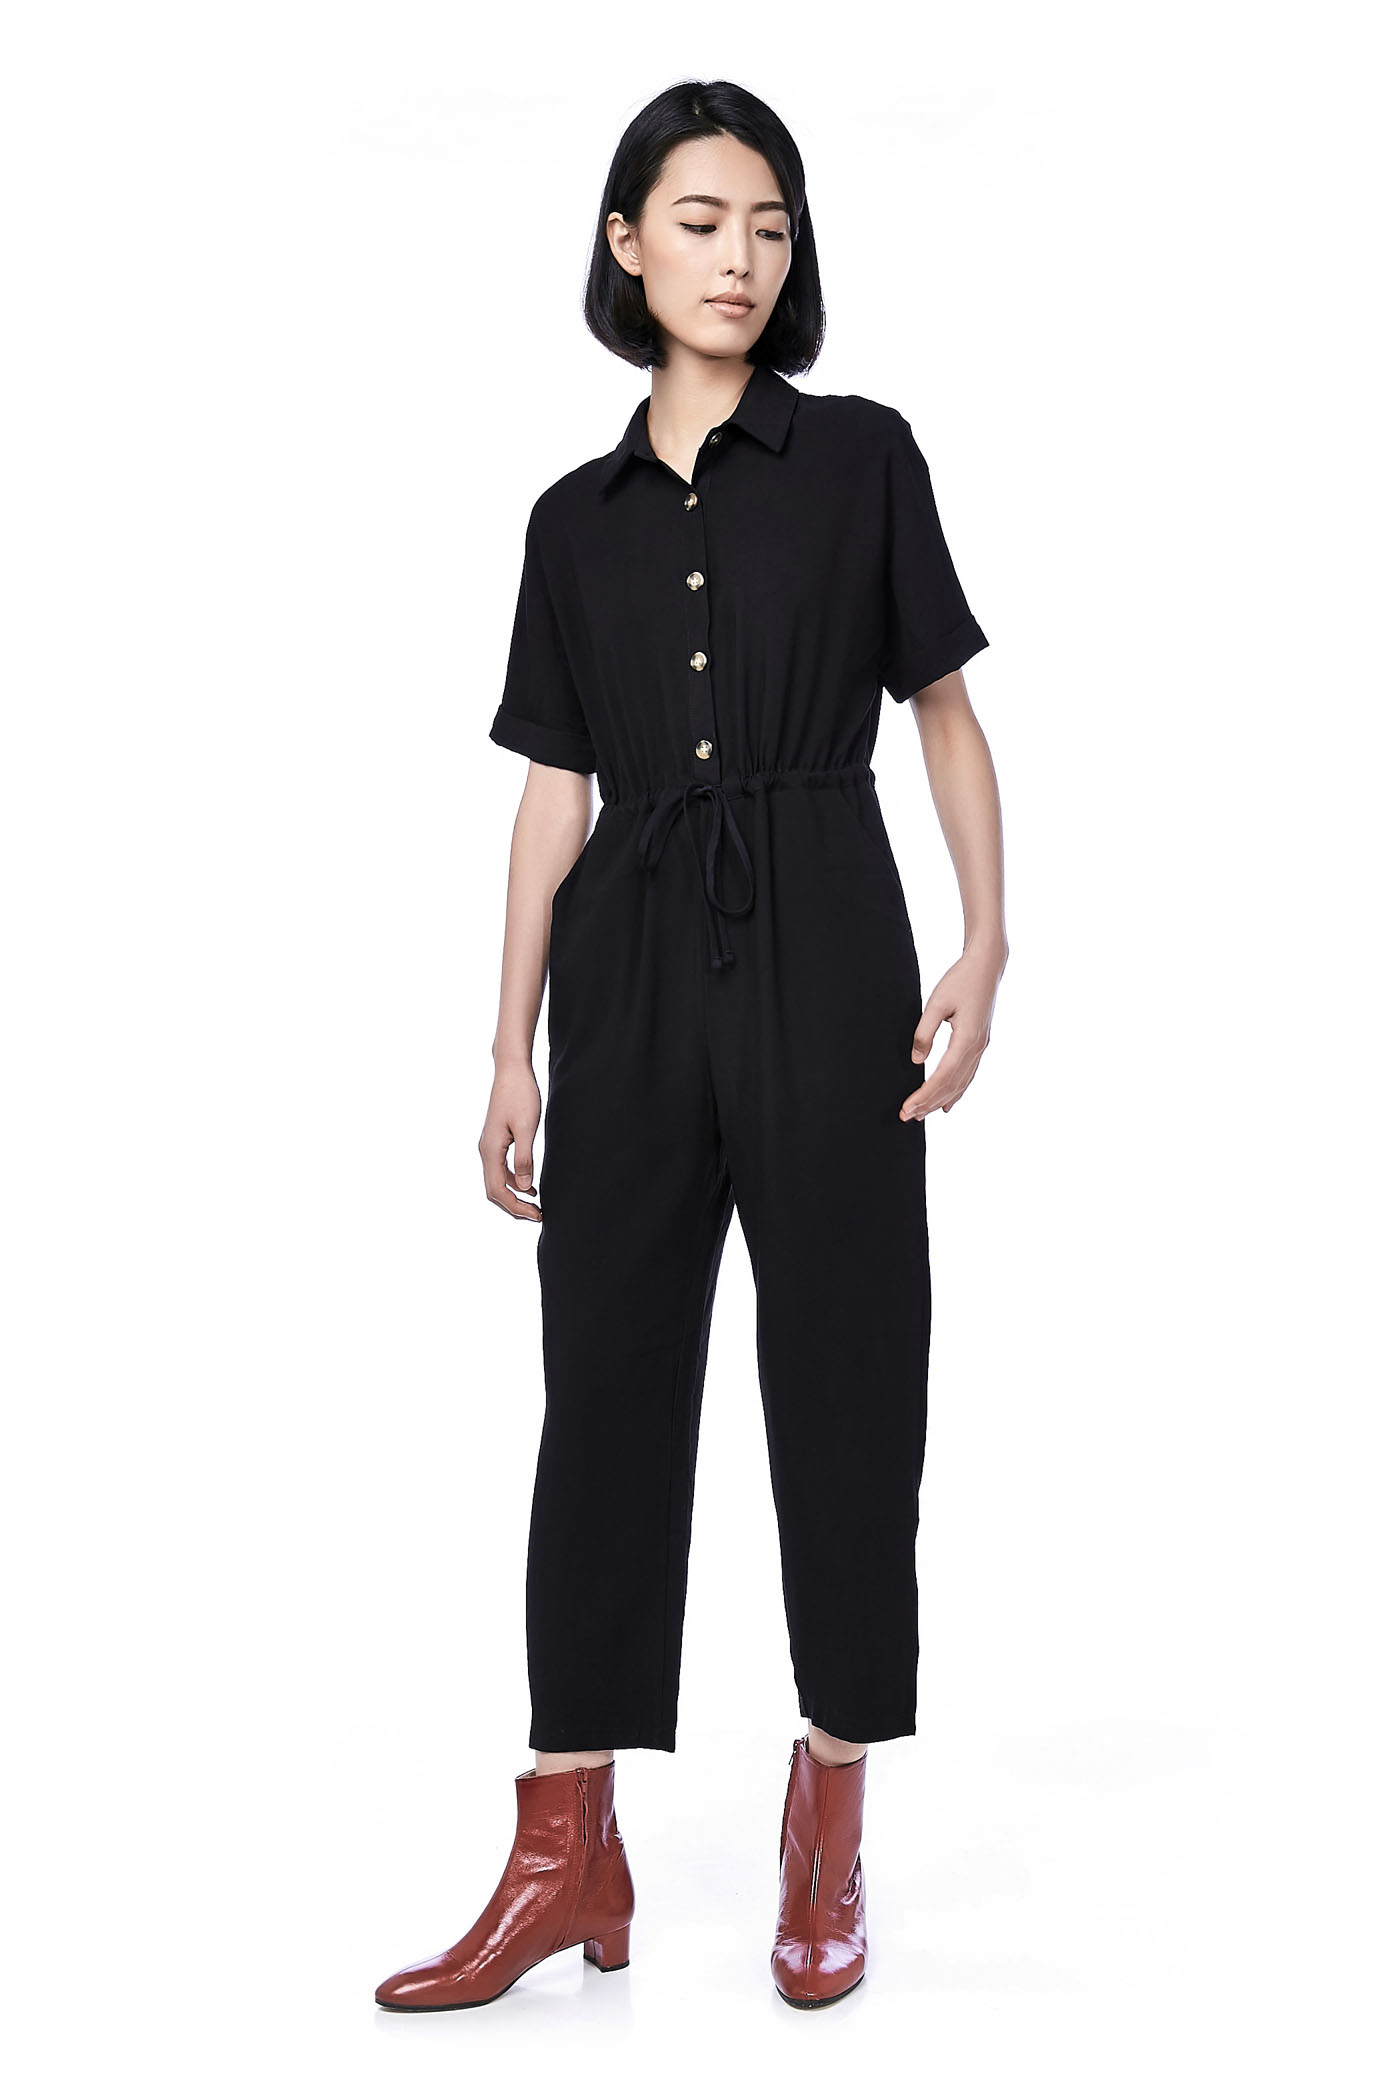 Lily Collared Jumpsuit 